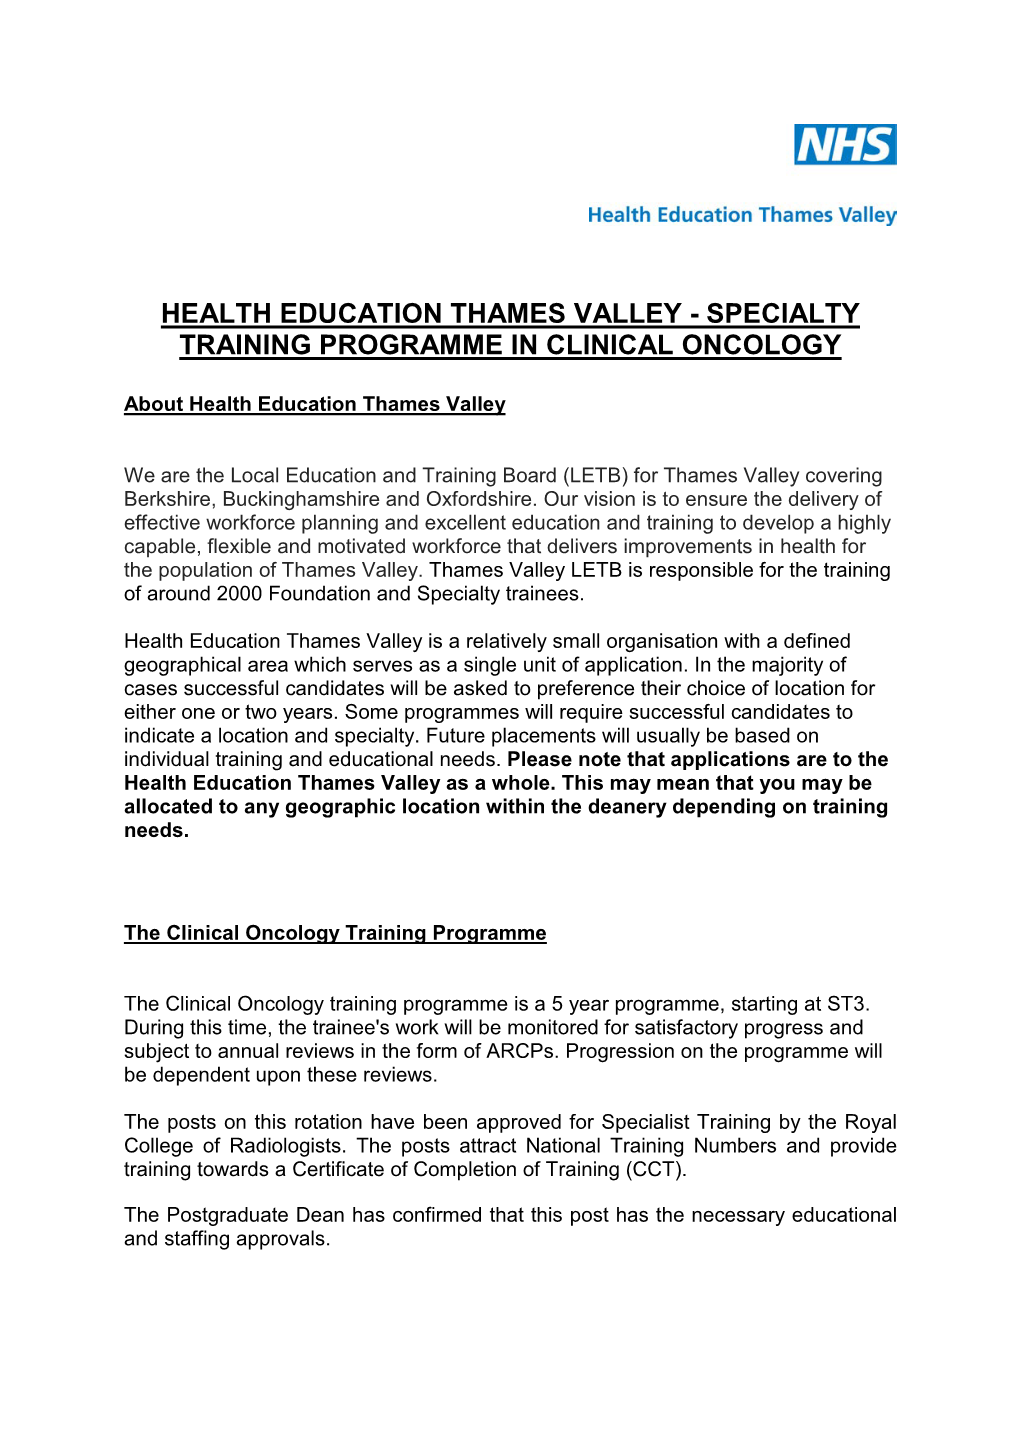 Health Education Thames Valley - Specialty Training Programme in Clinical Oncology